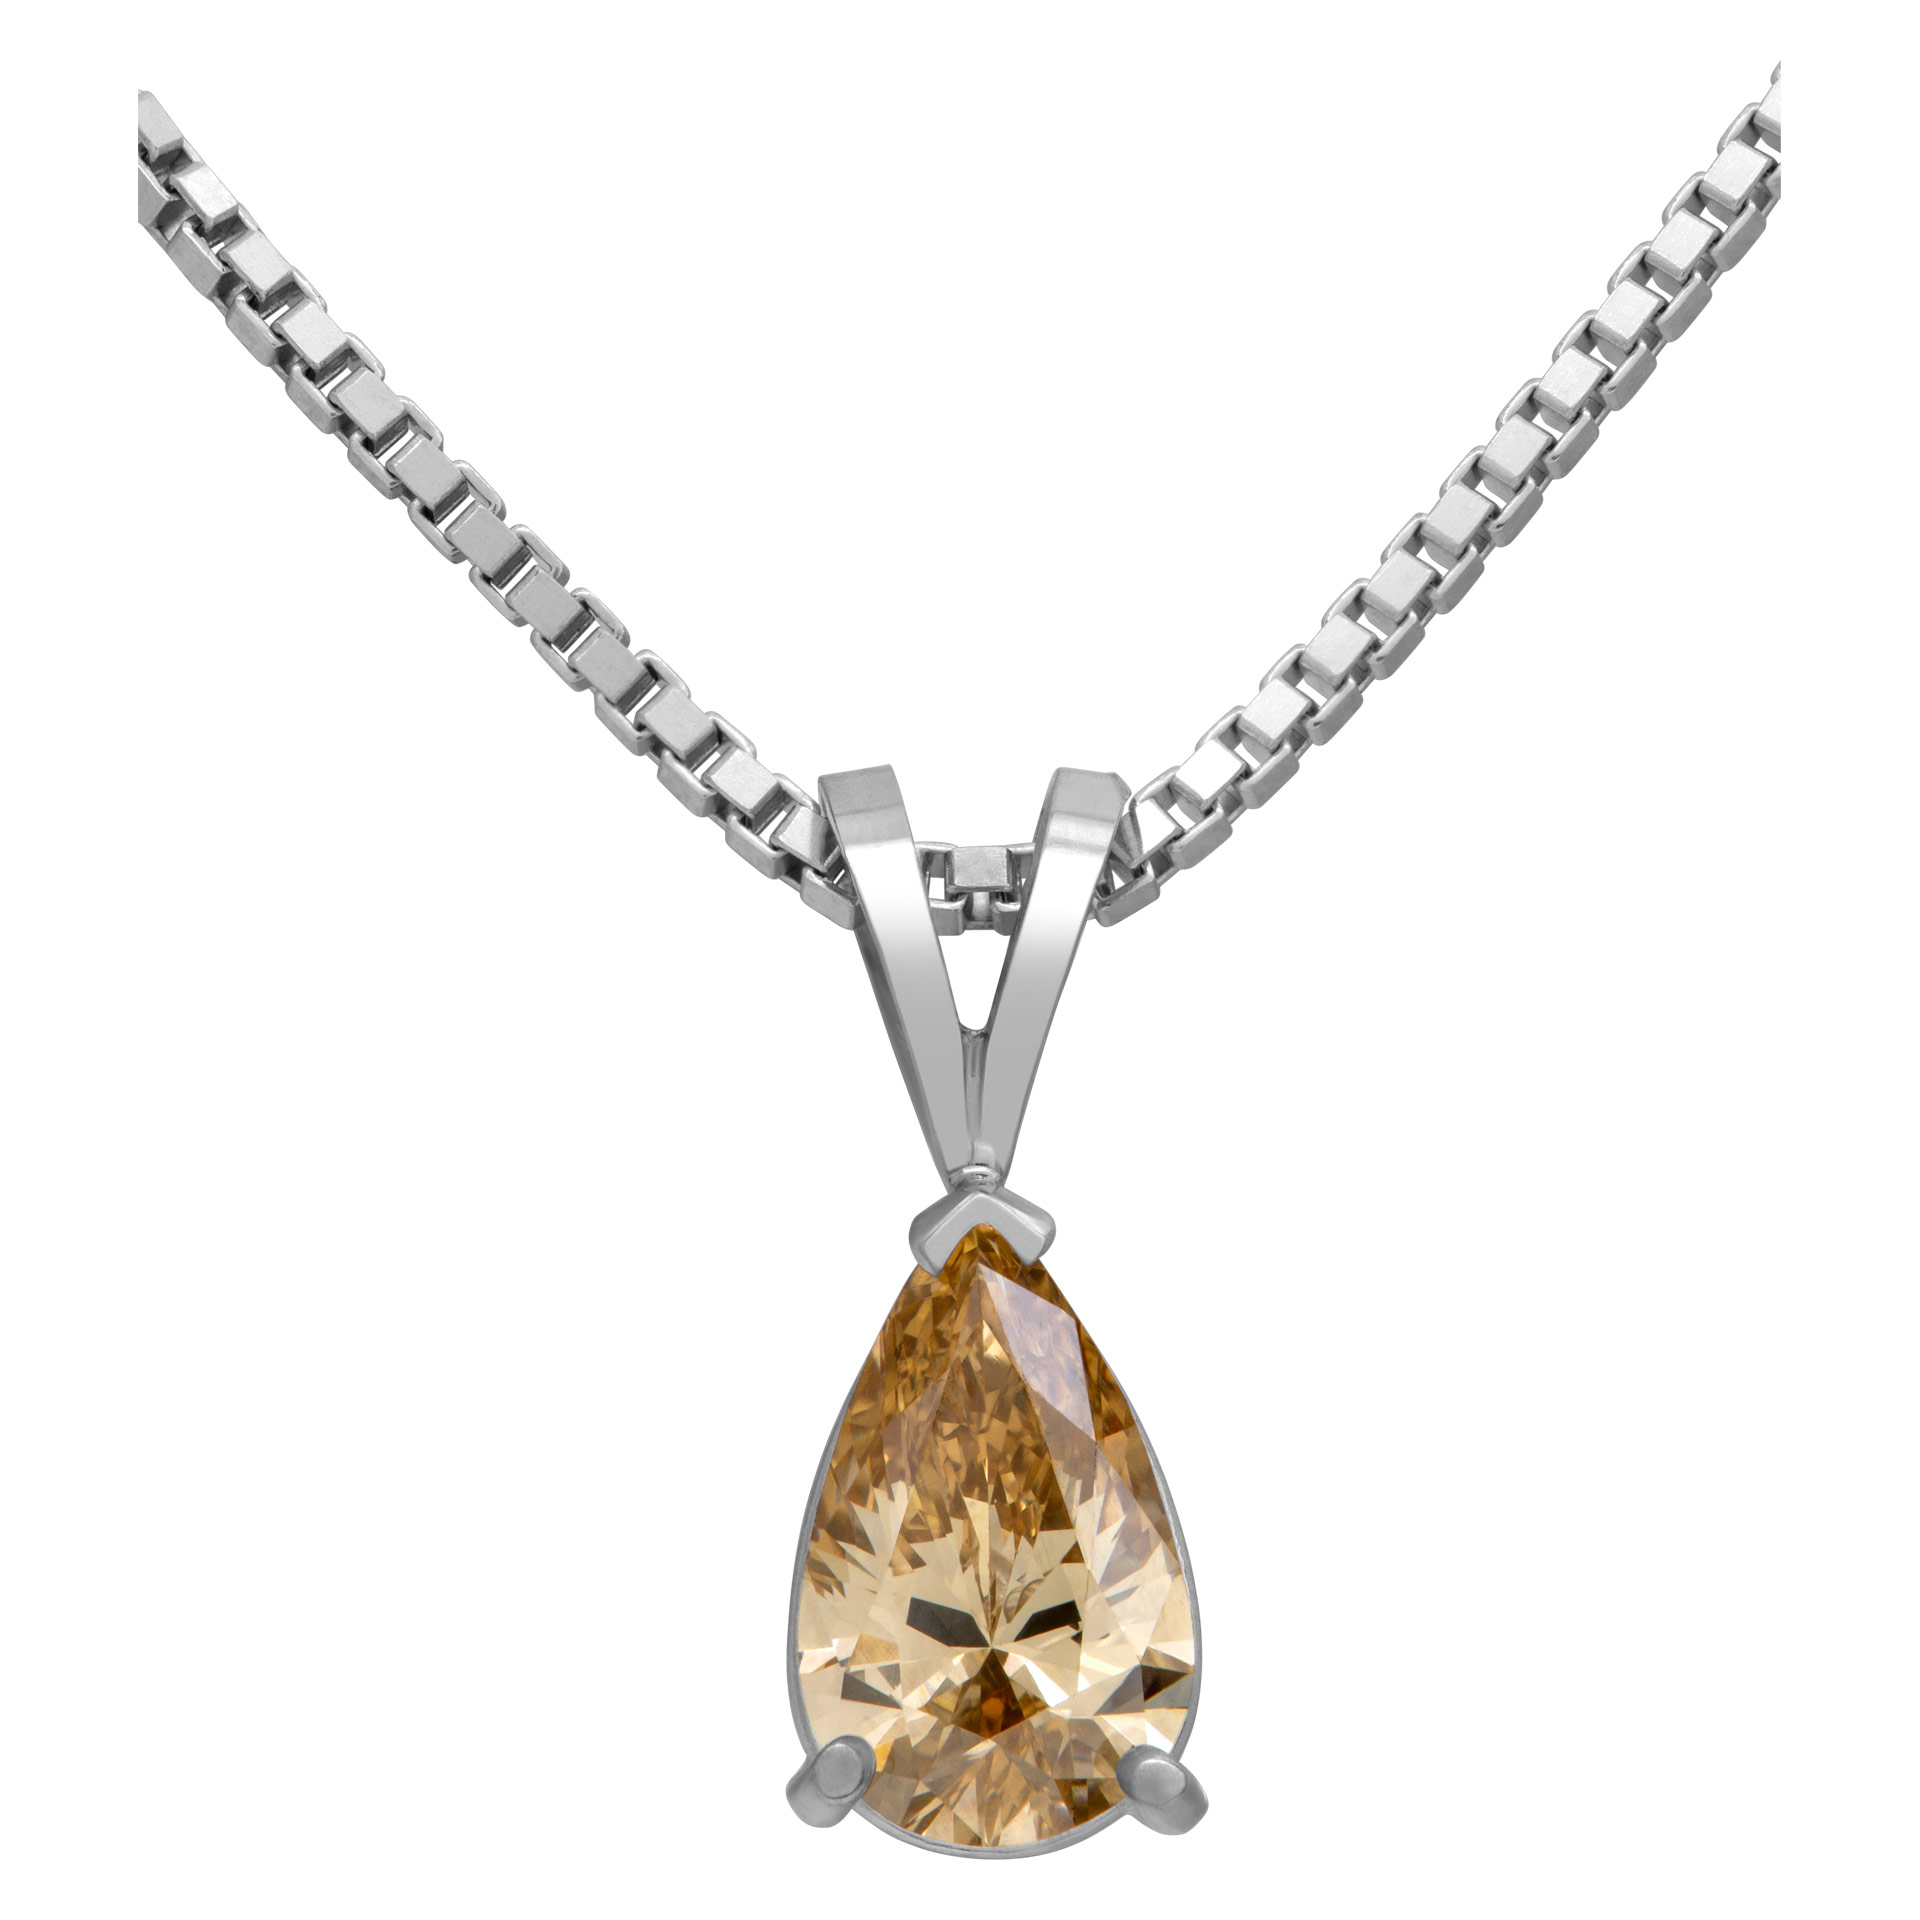 GIA certified 1.11 carat natural, fancy brown-yellow, even VS1 pear cut diamond on white gold pendant and chain . image 1